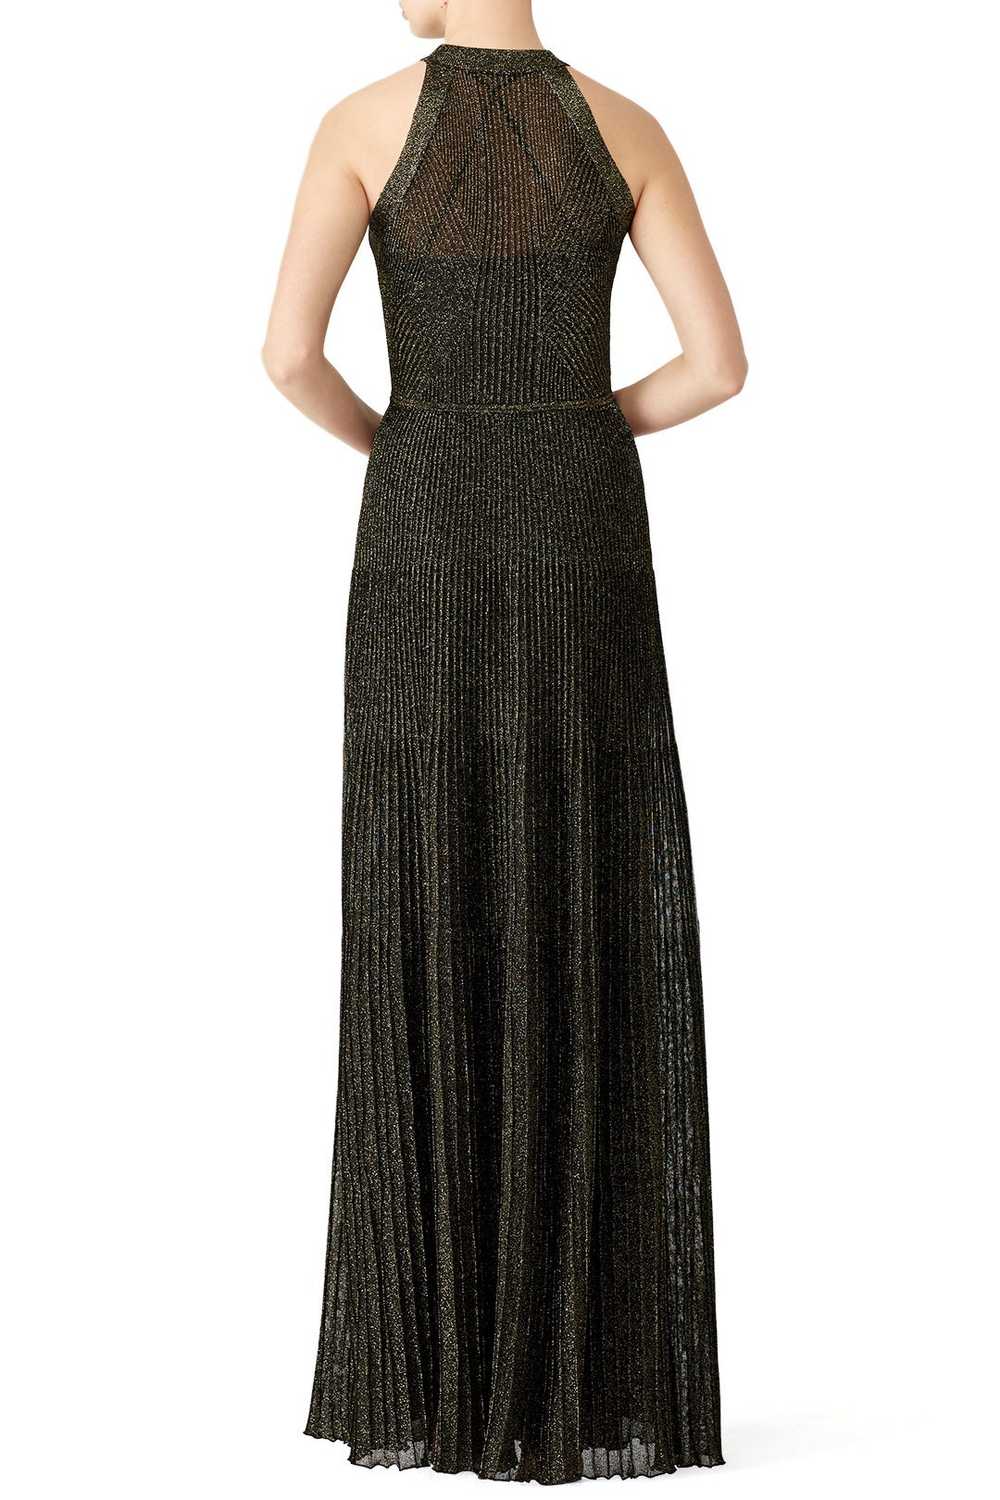 Vionnet Black and Gold Knit Gown - image 2